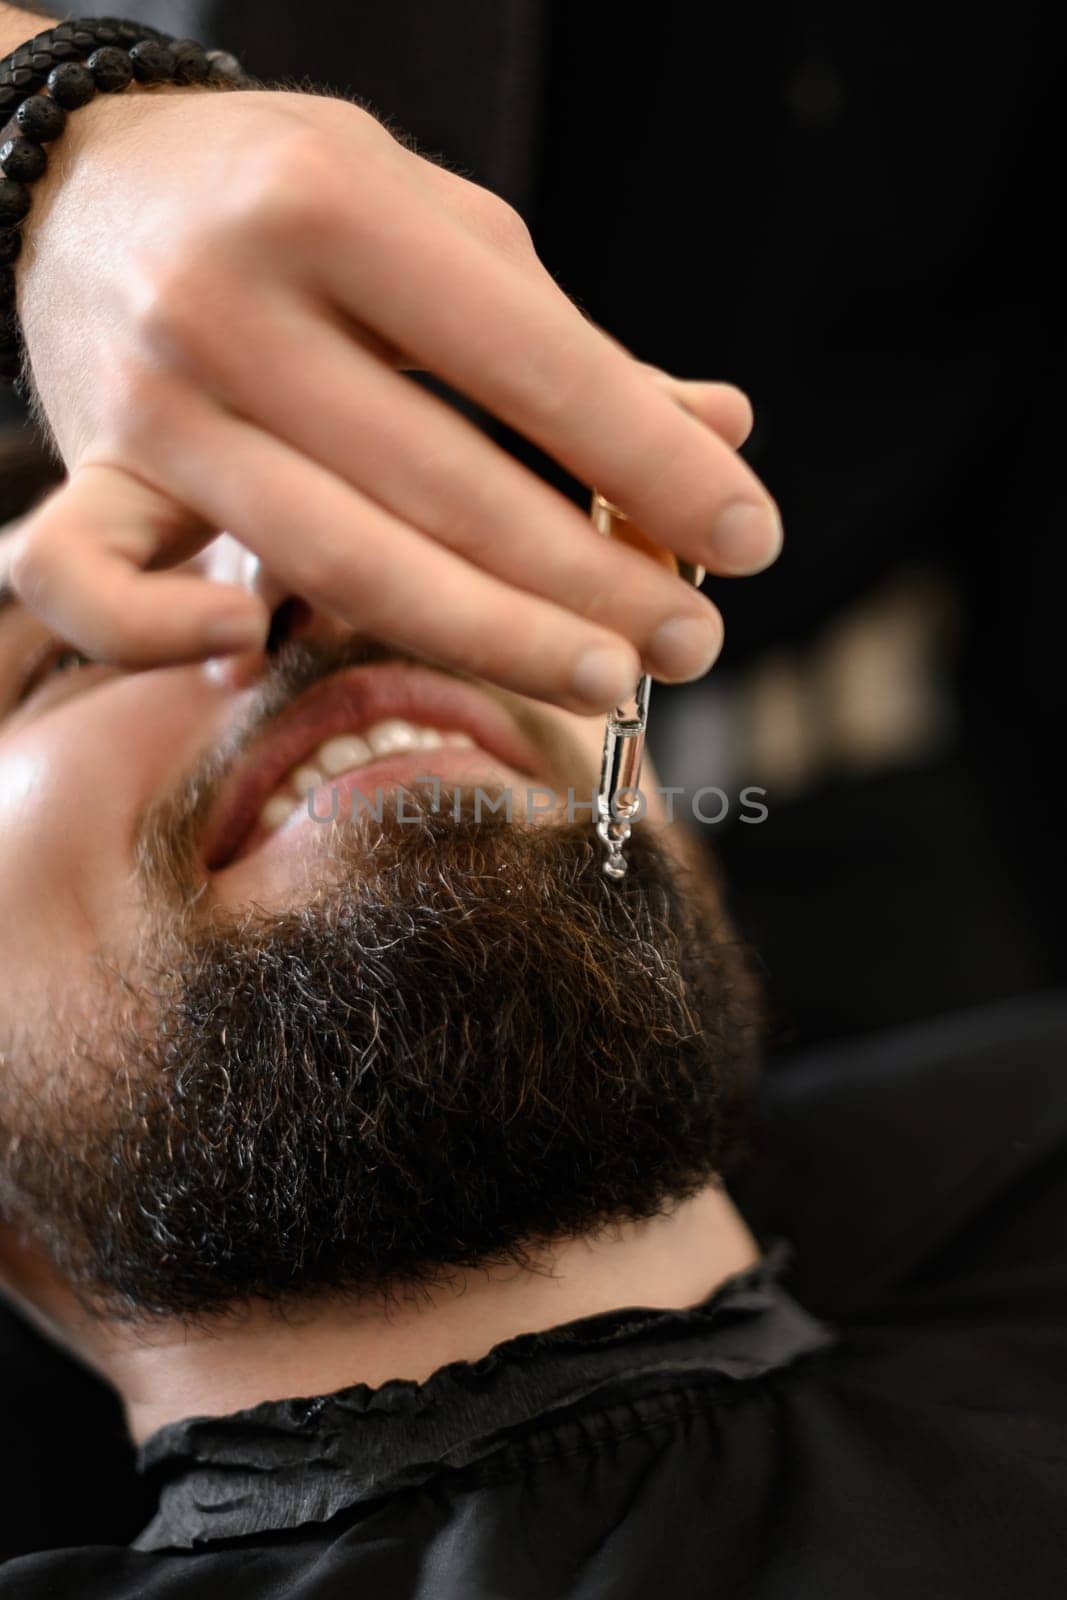 A barber stylist applies drops of oil to the client beard to moisturize and soften. by Niko_Cingaryuk